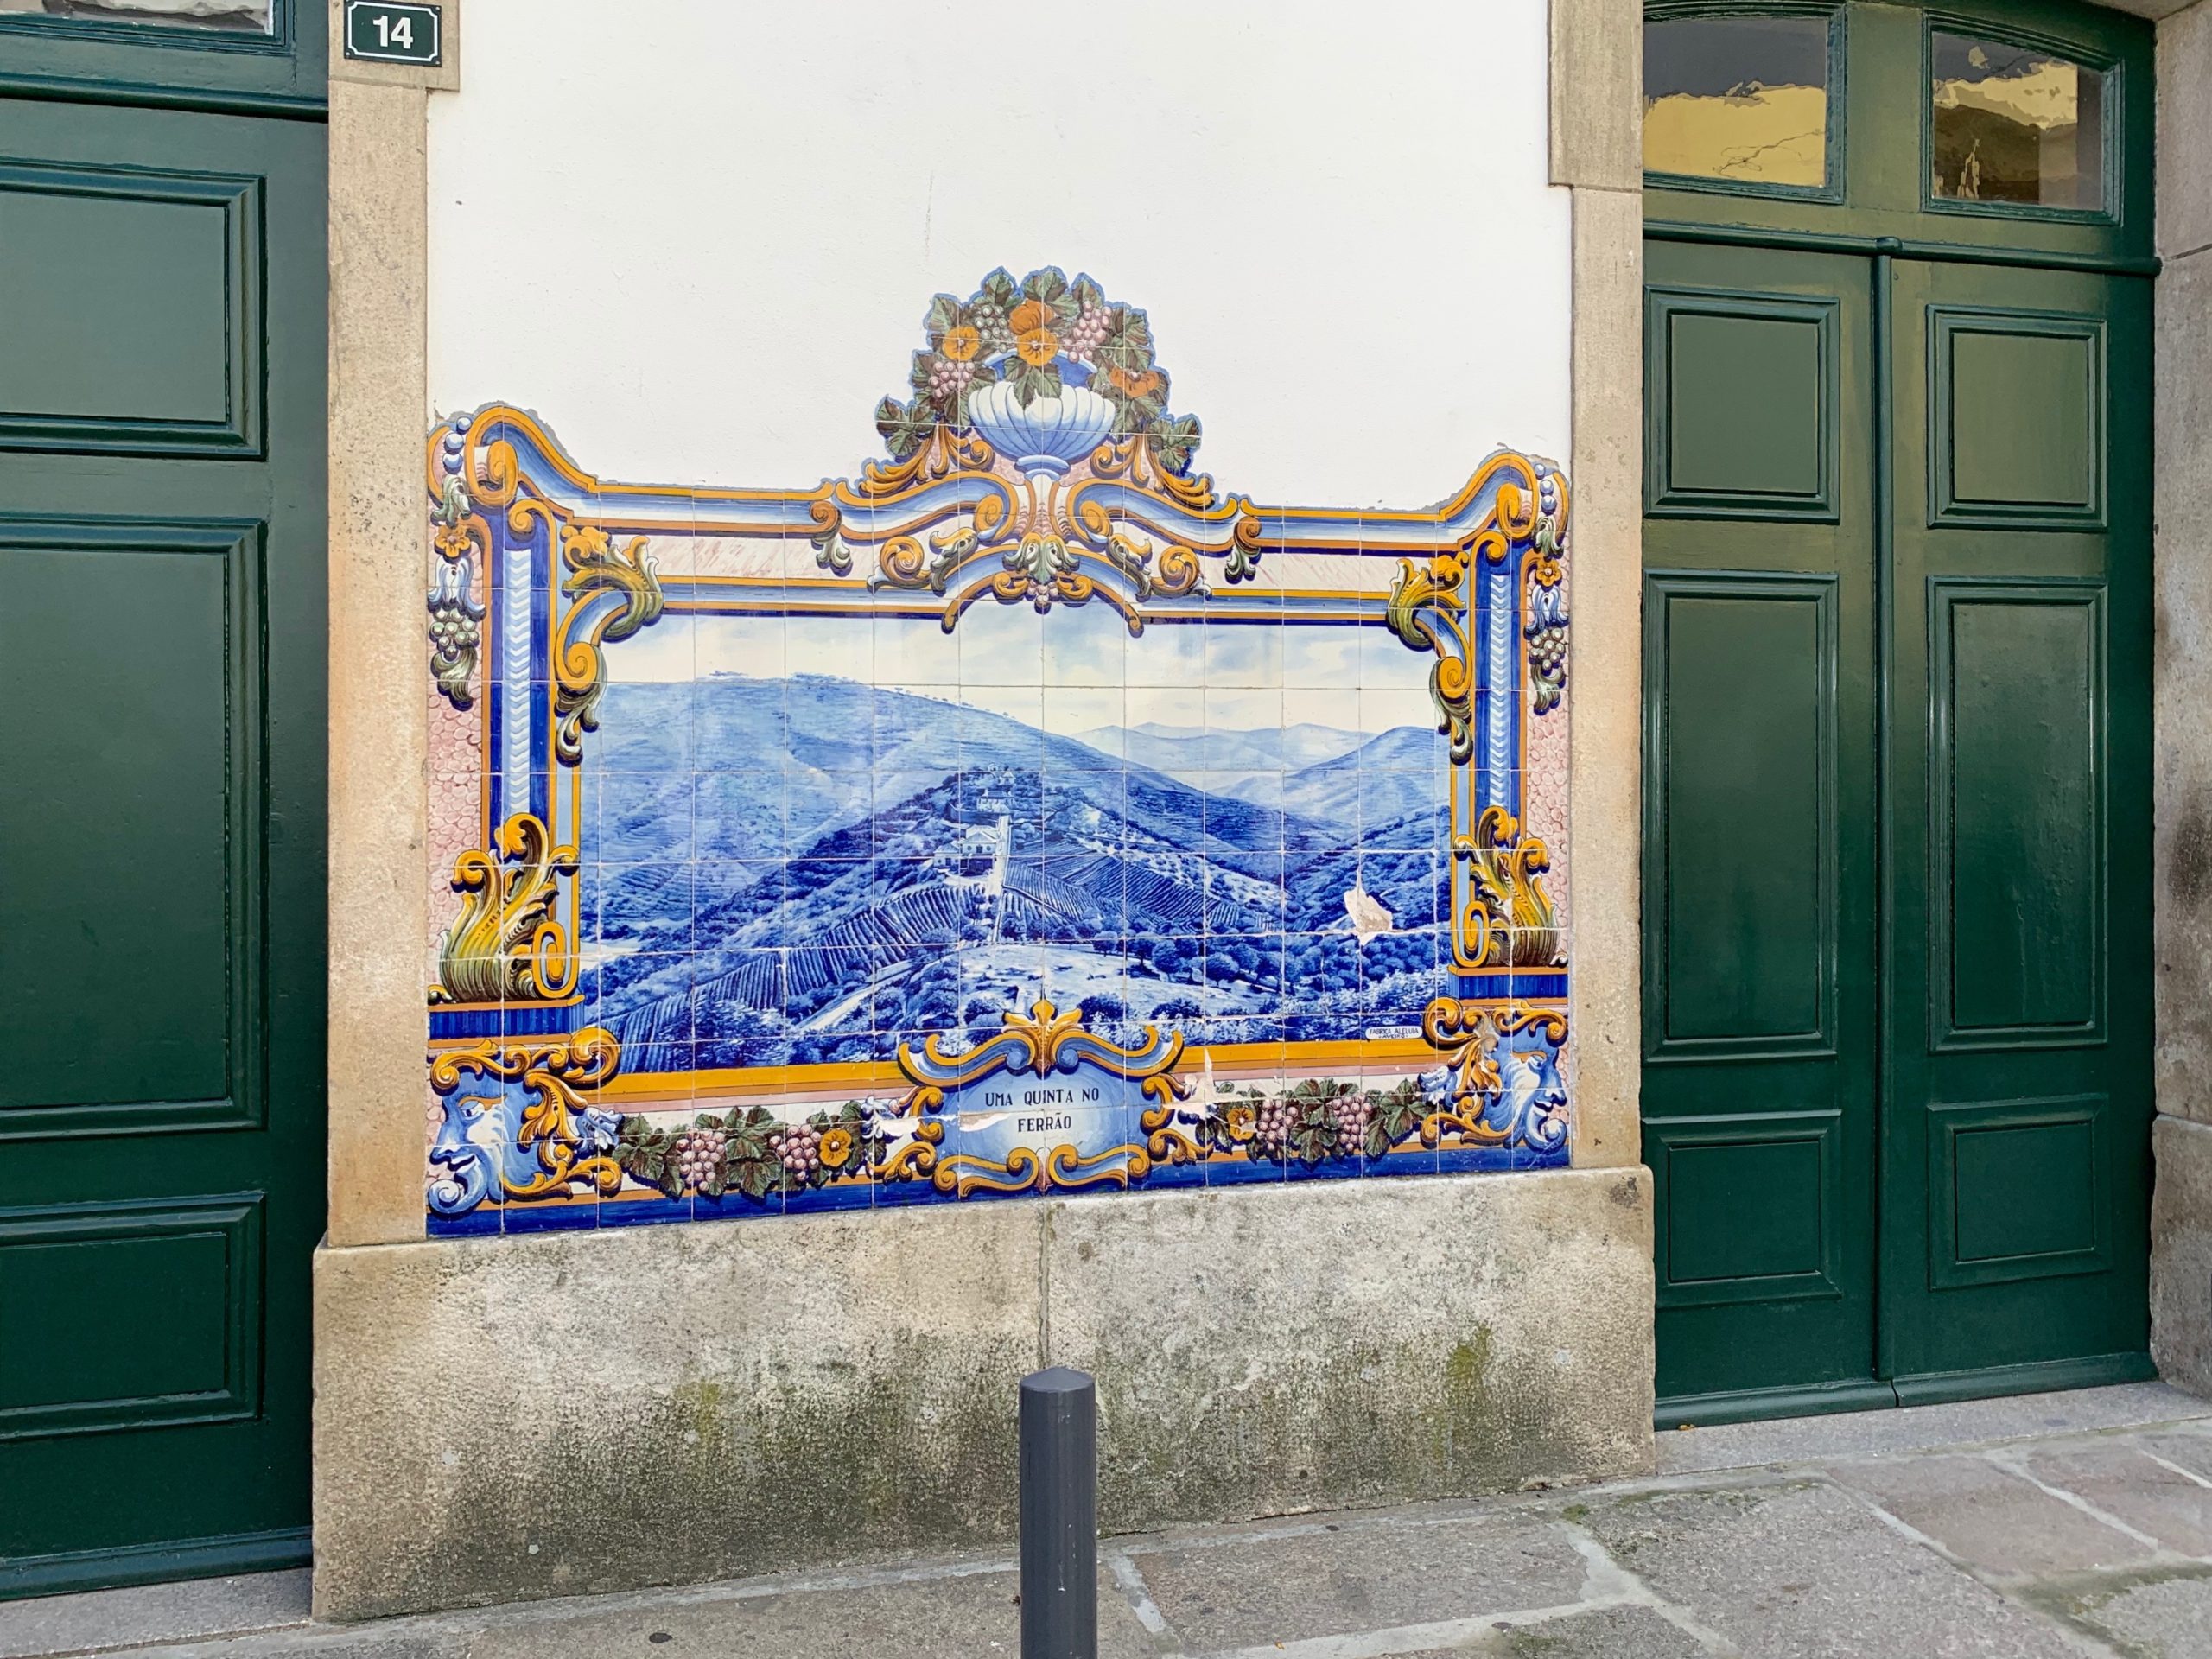 Azulejos panel at the Pinhão train station in Portugal